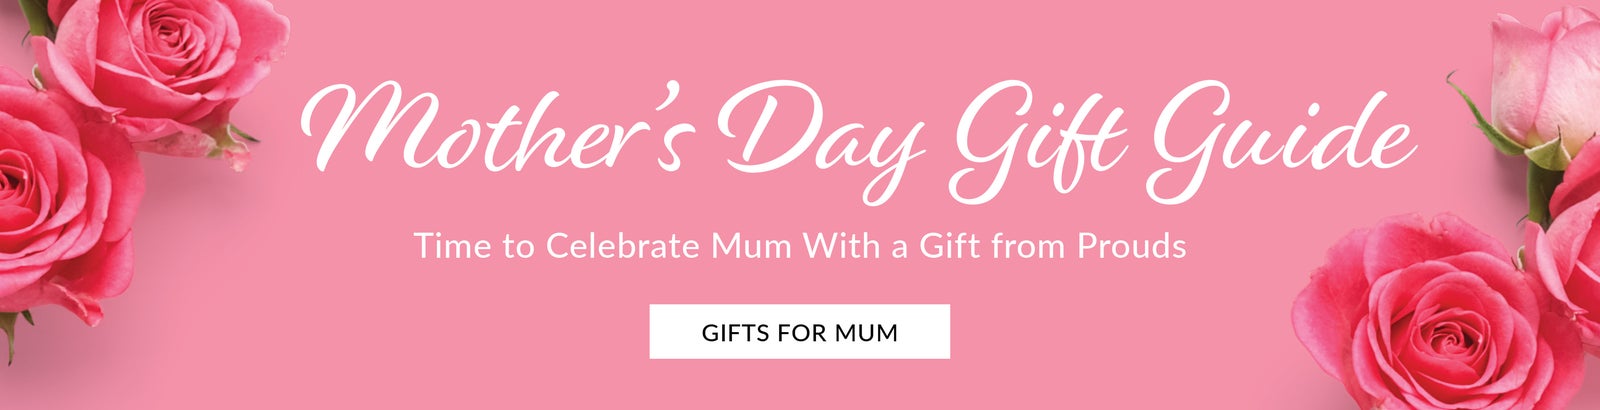 Best Mom In The World, Mother's Day, Mom Birthday, Gifts, Pearls